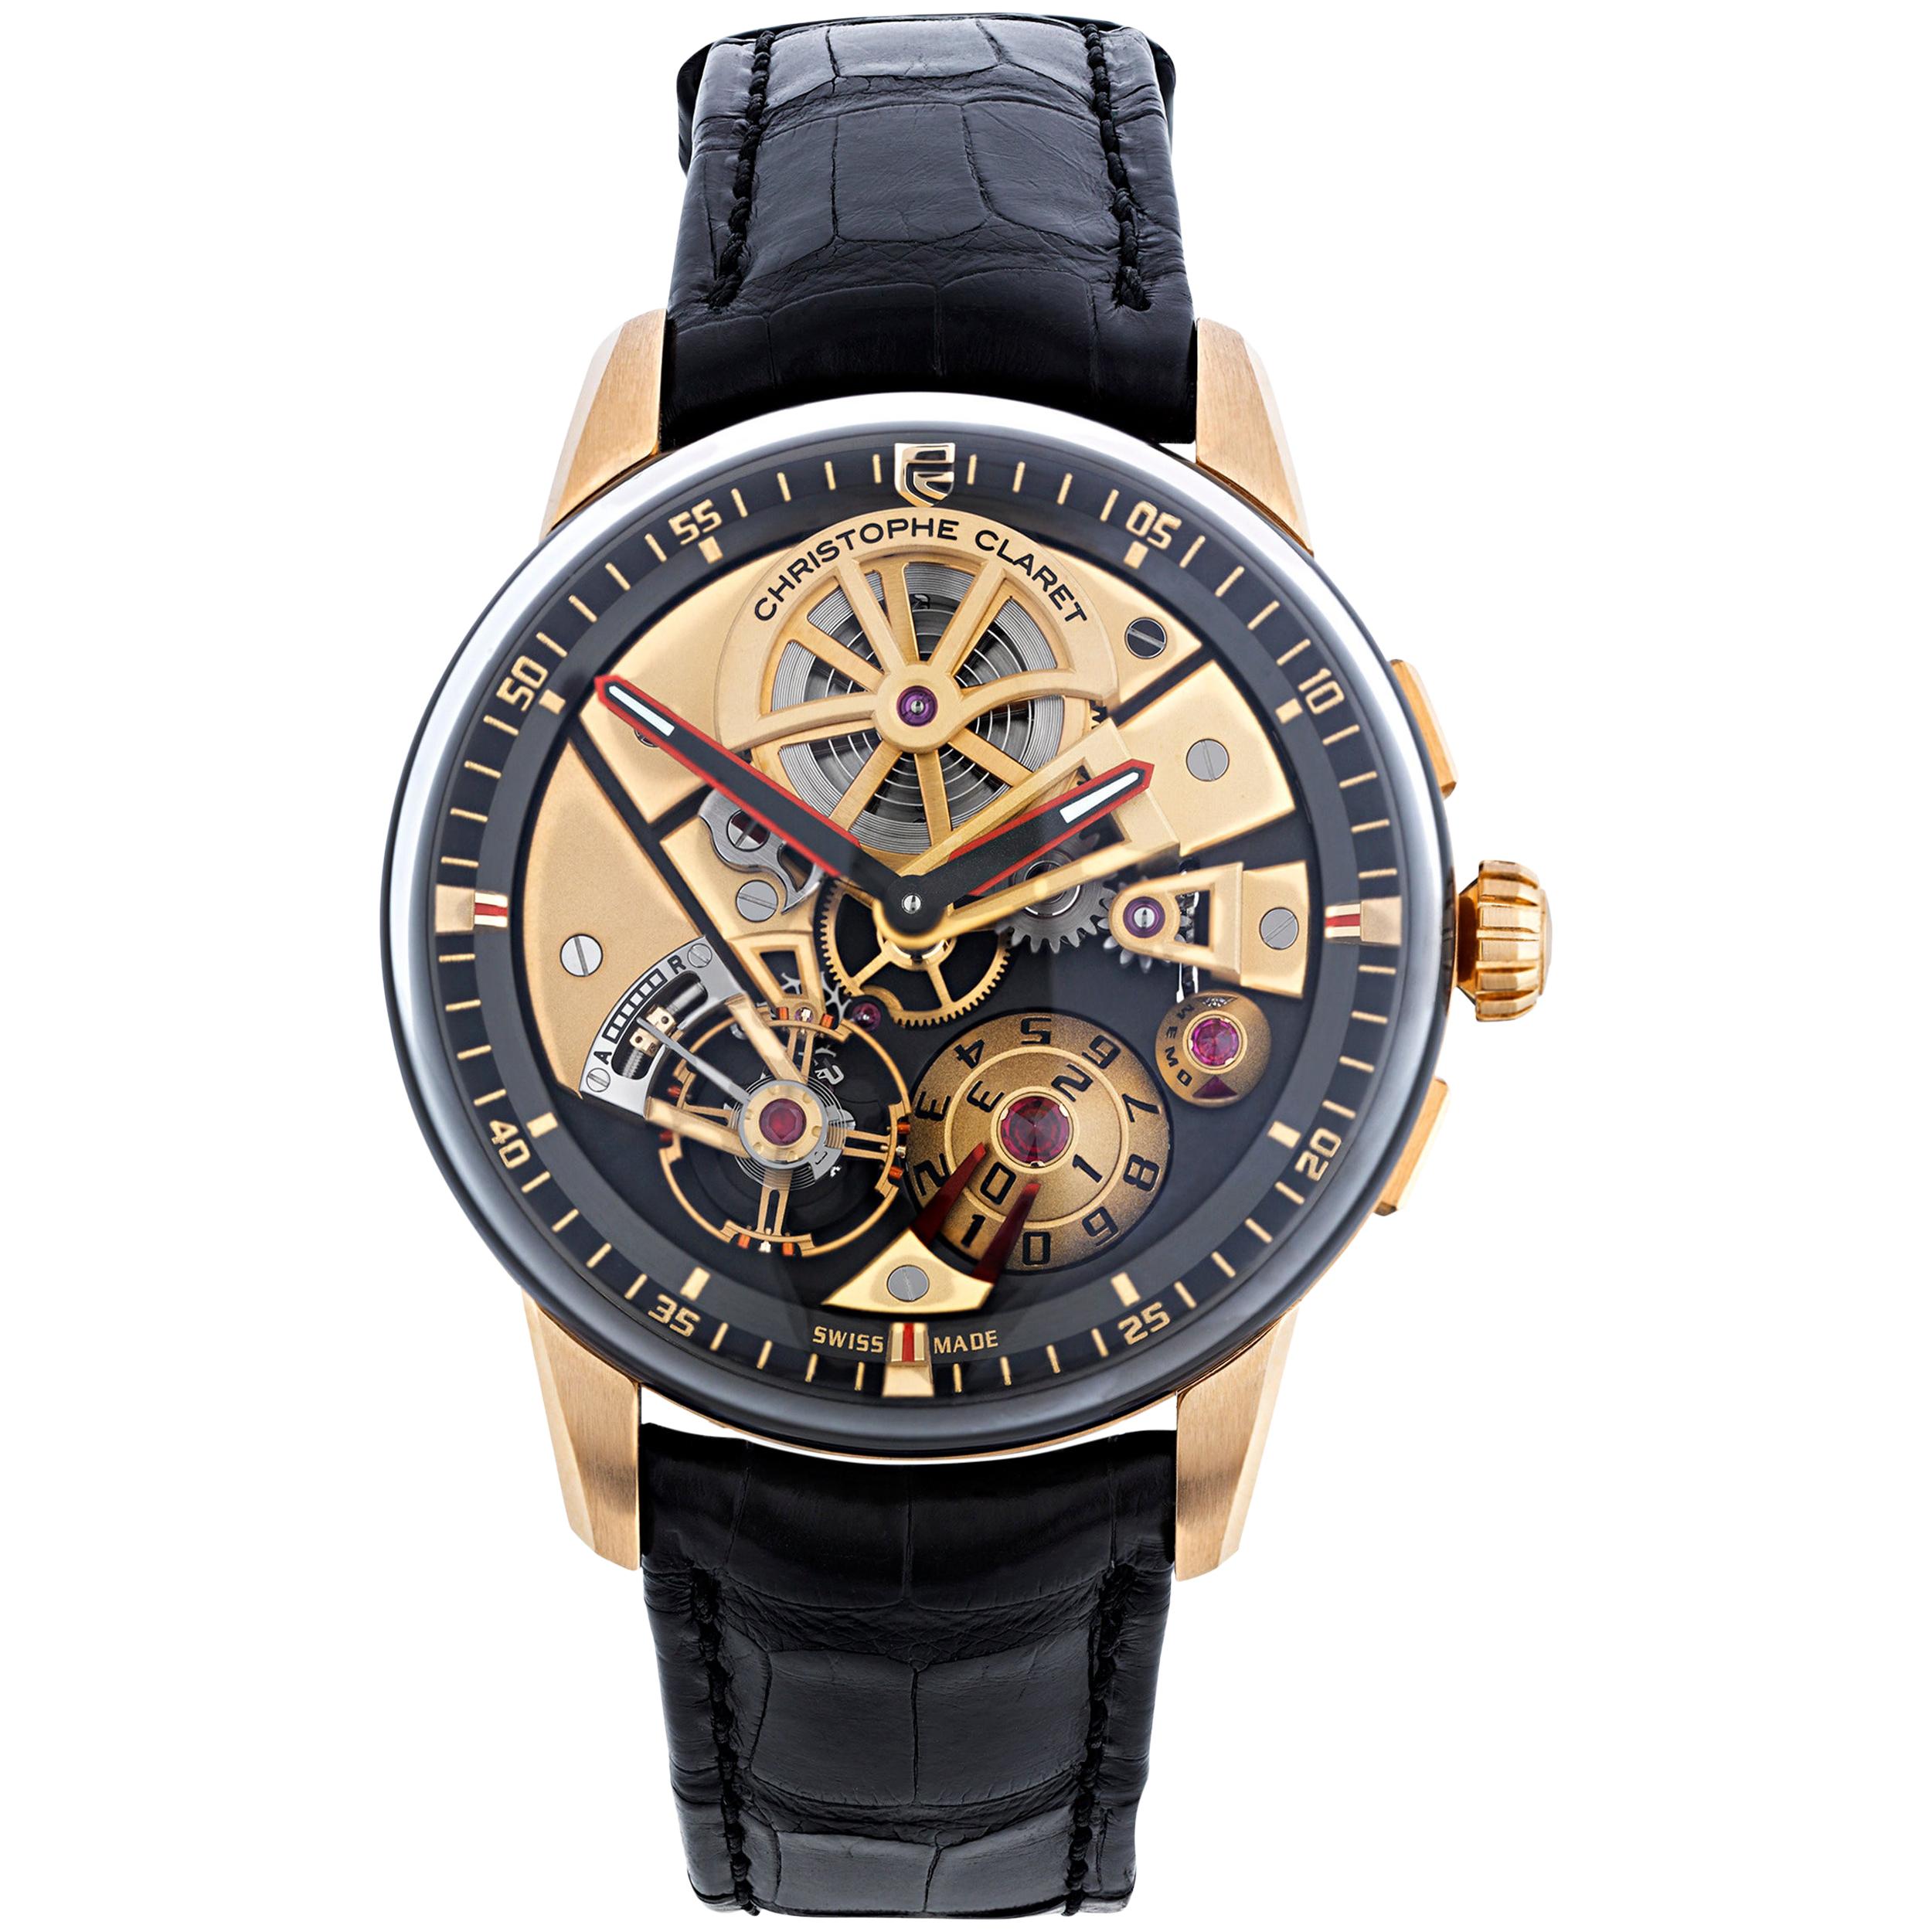 Maestro Limited Edition Watch by Christophe Claret